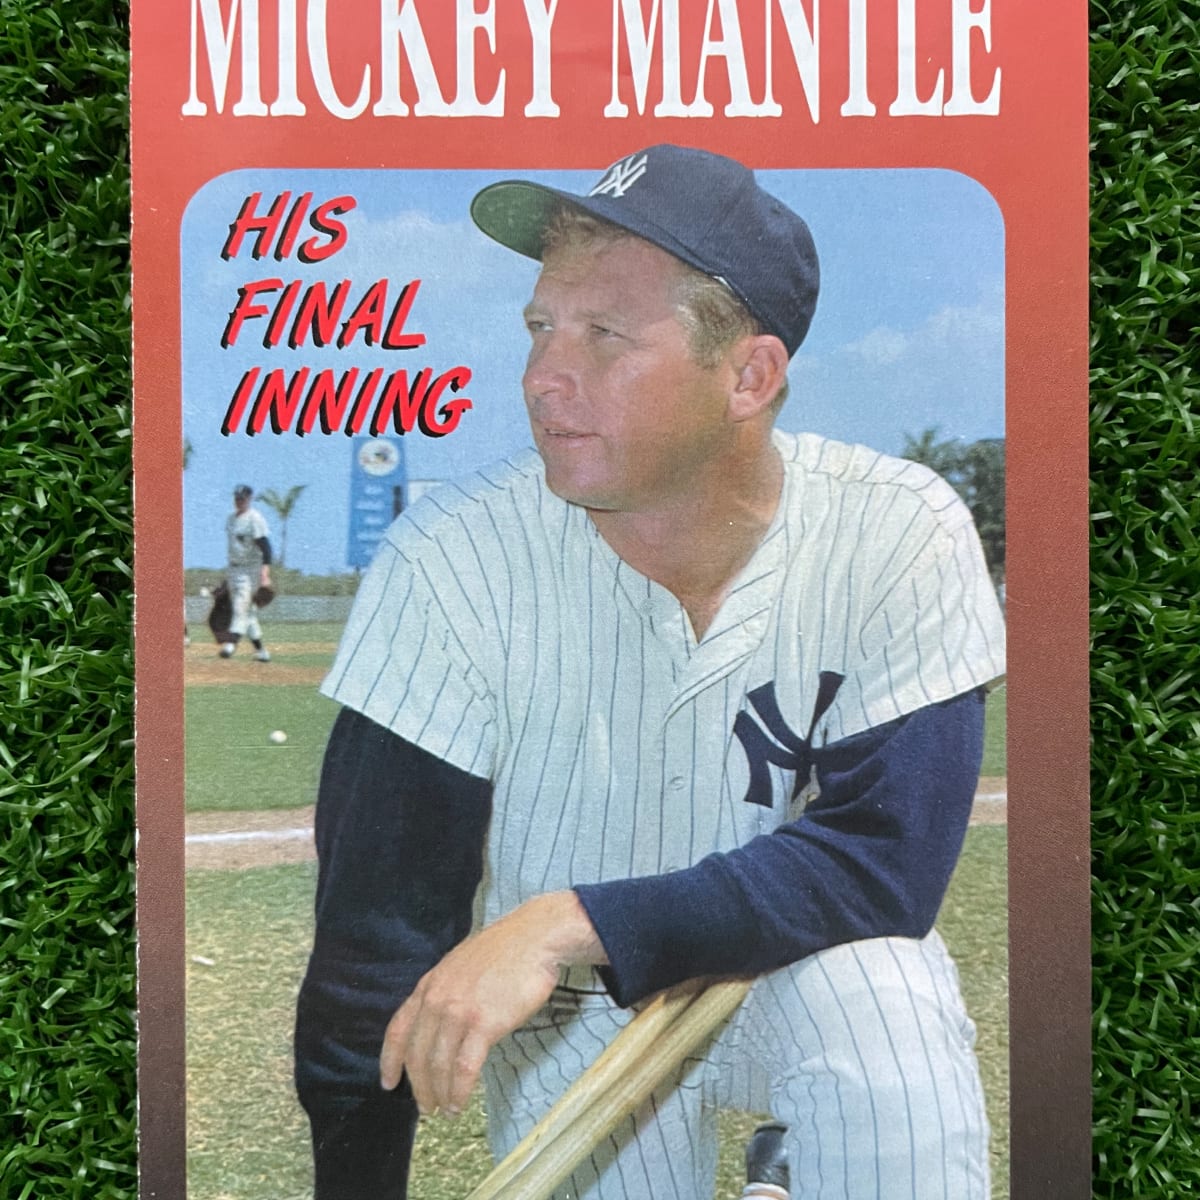 Retro: The night New York Yankees star Mickey Mantle was taken to